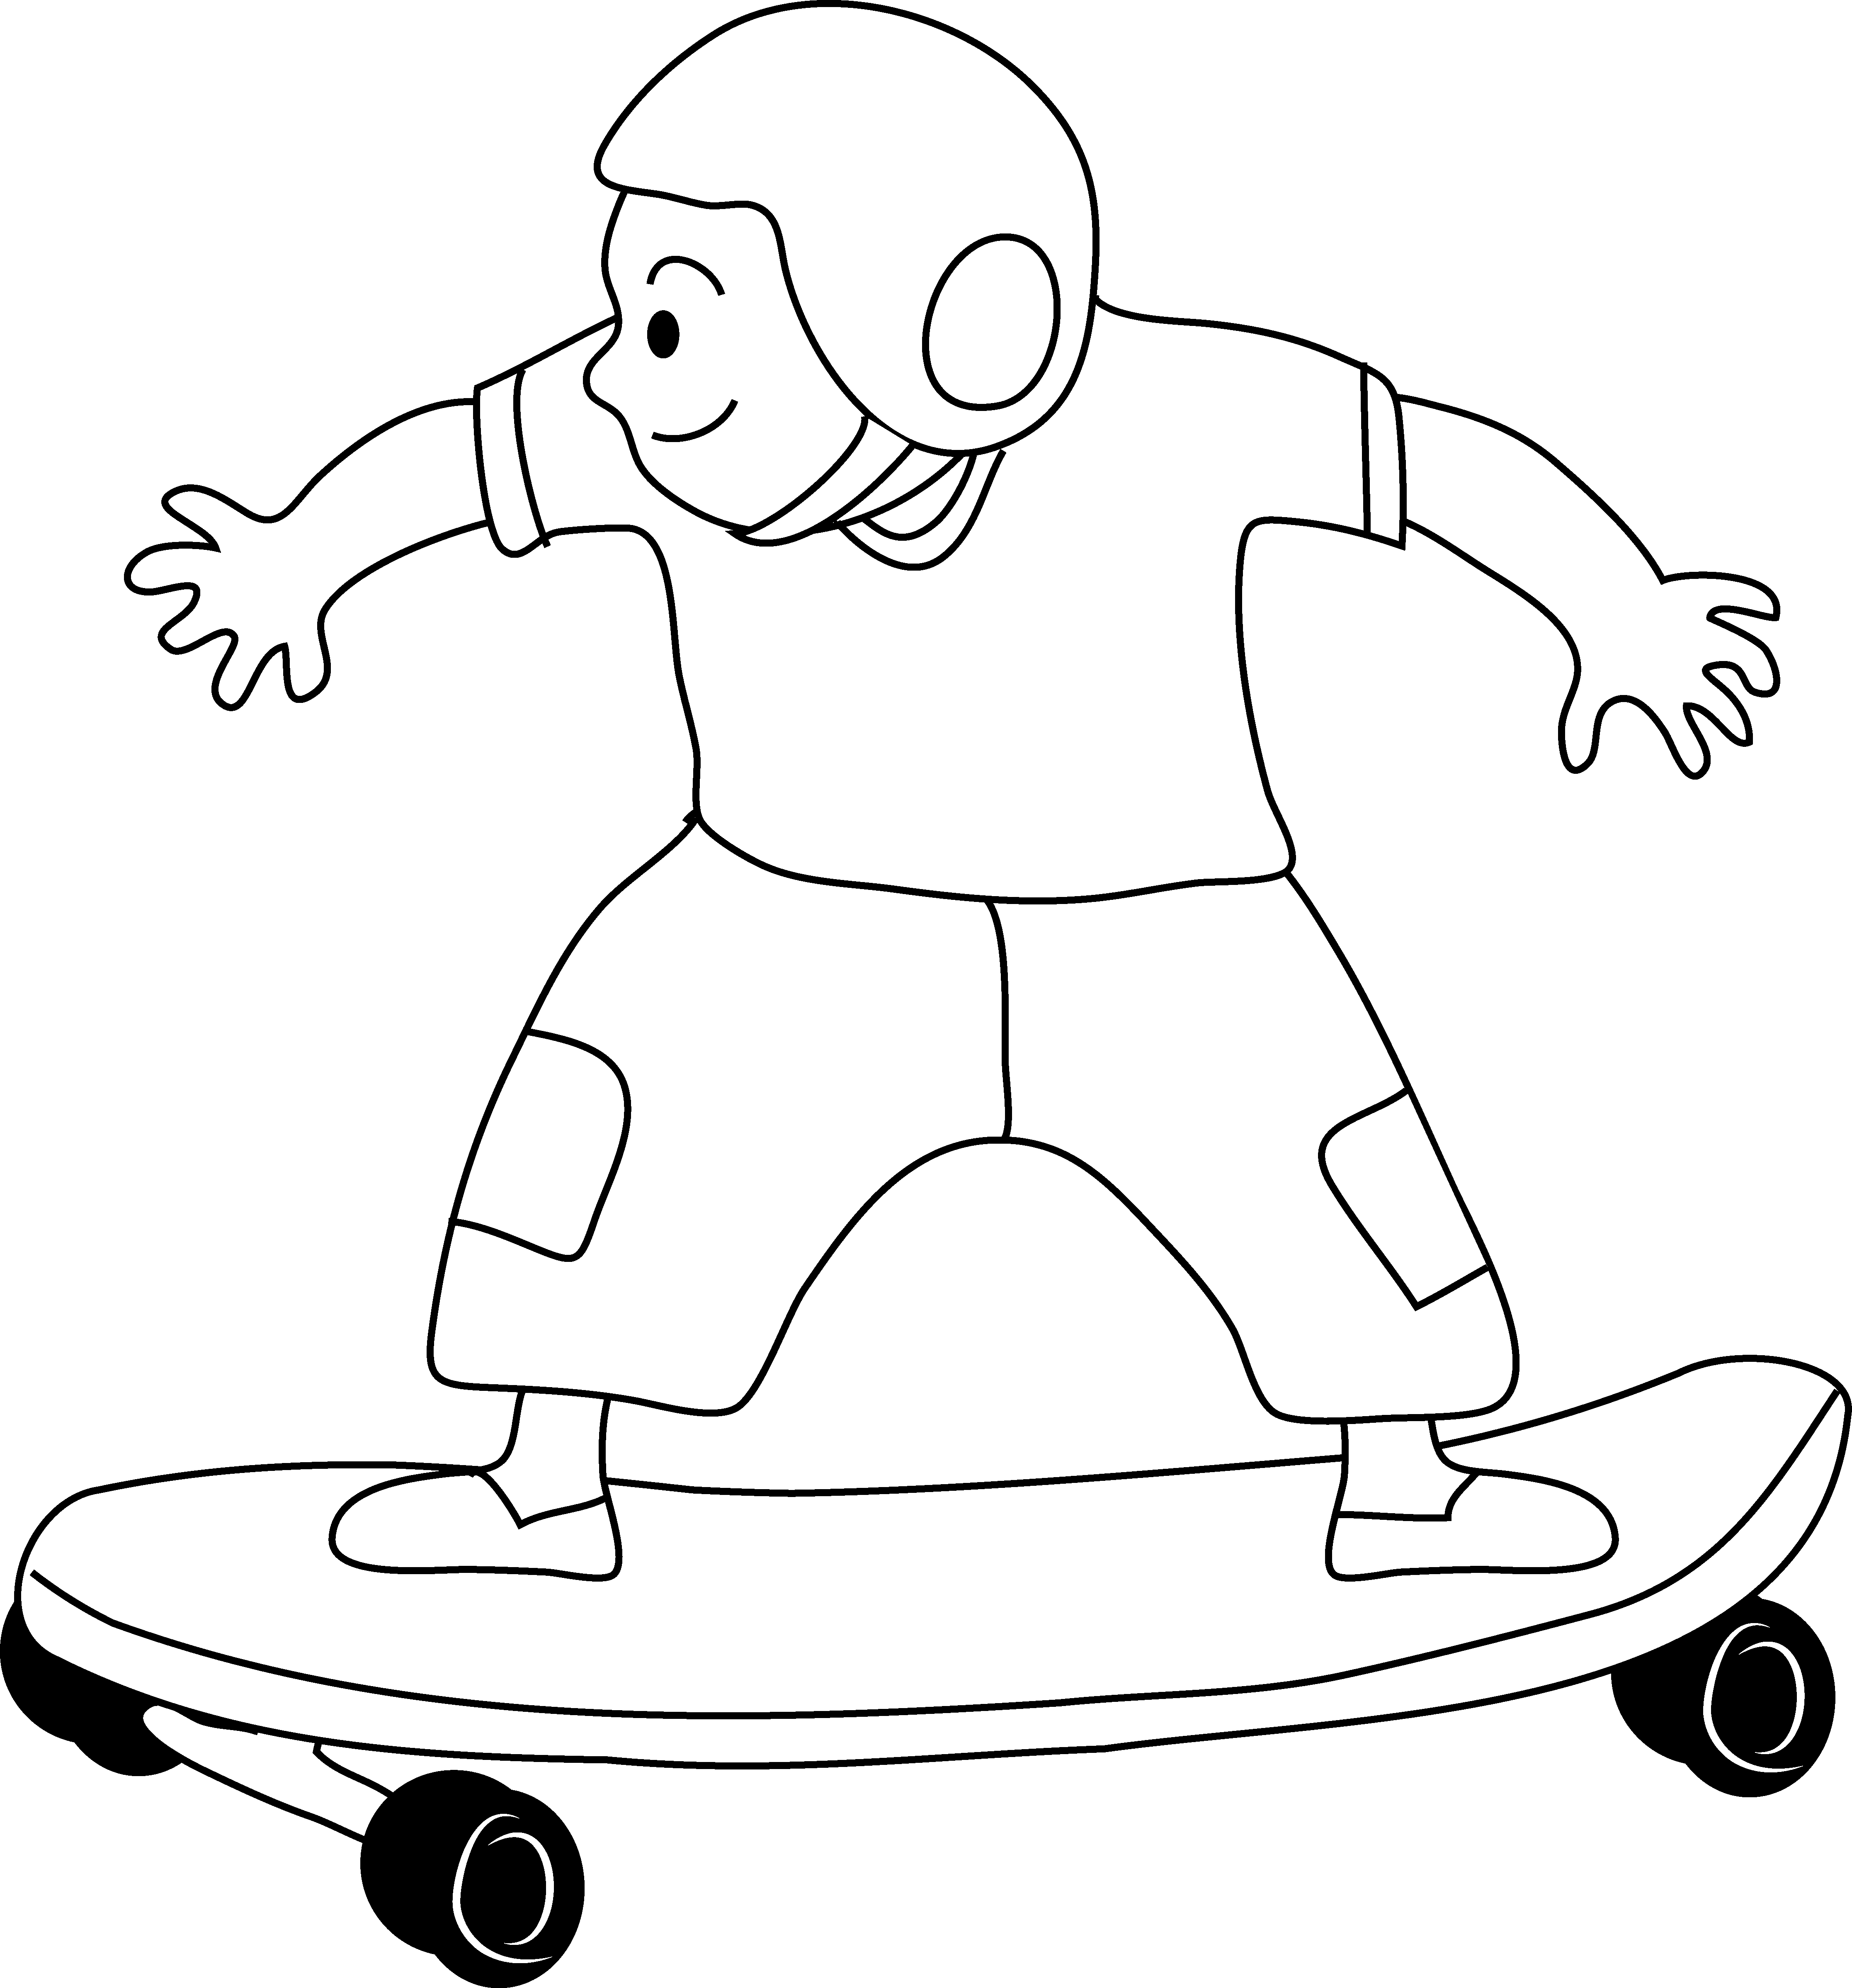 Skateboarding kid coloring page. Youtube clipart skateboard